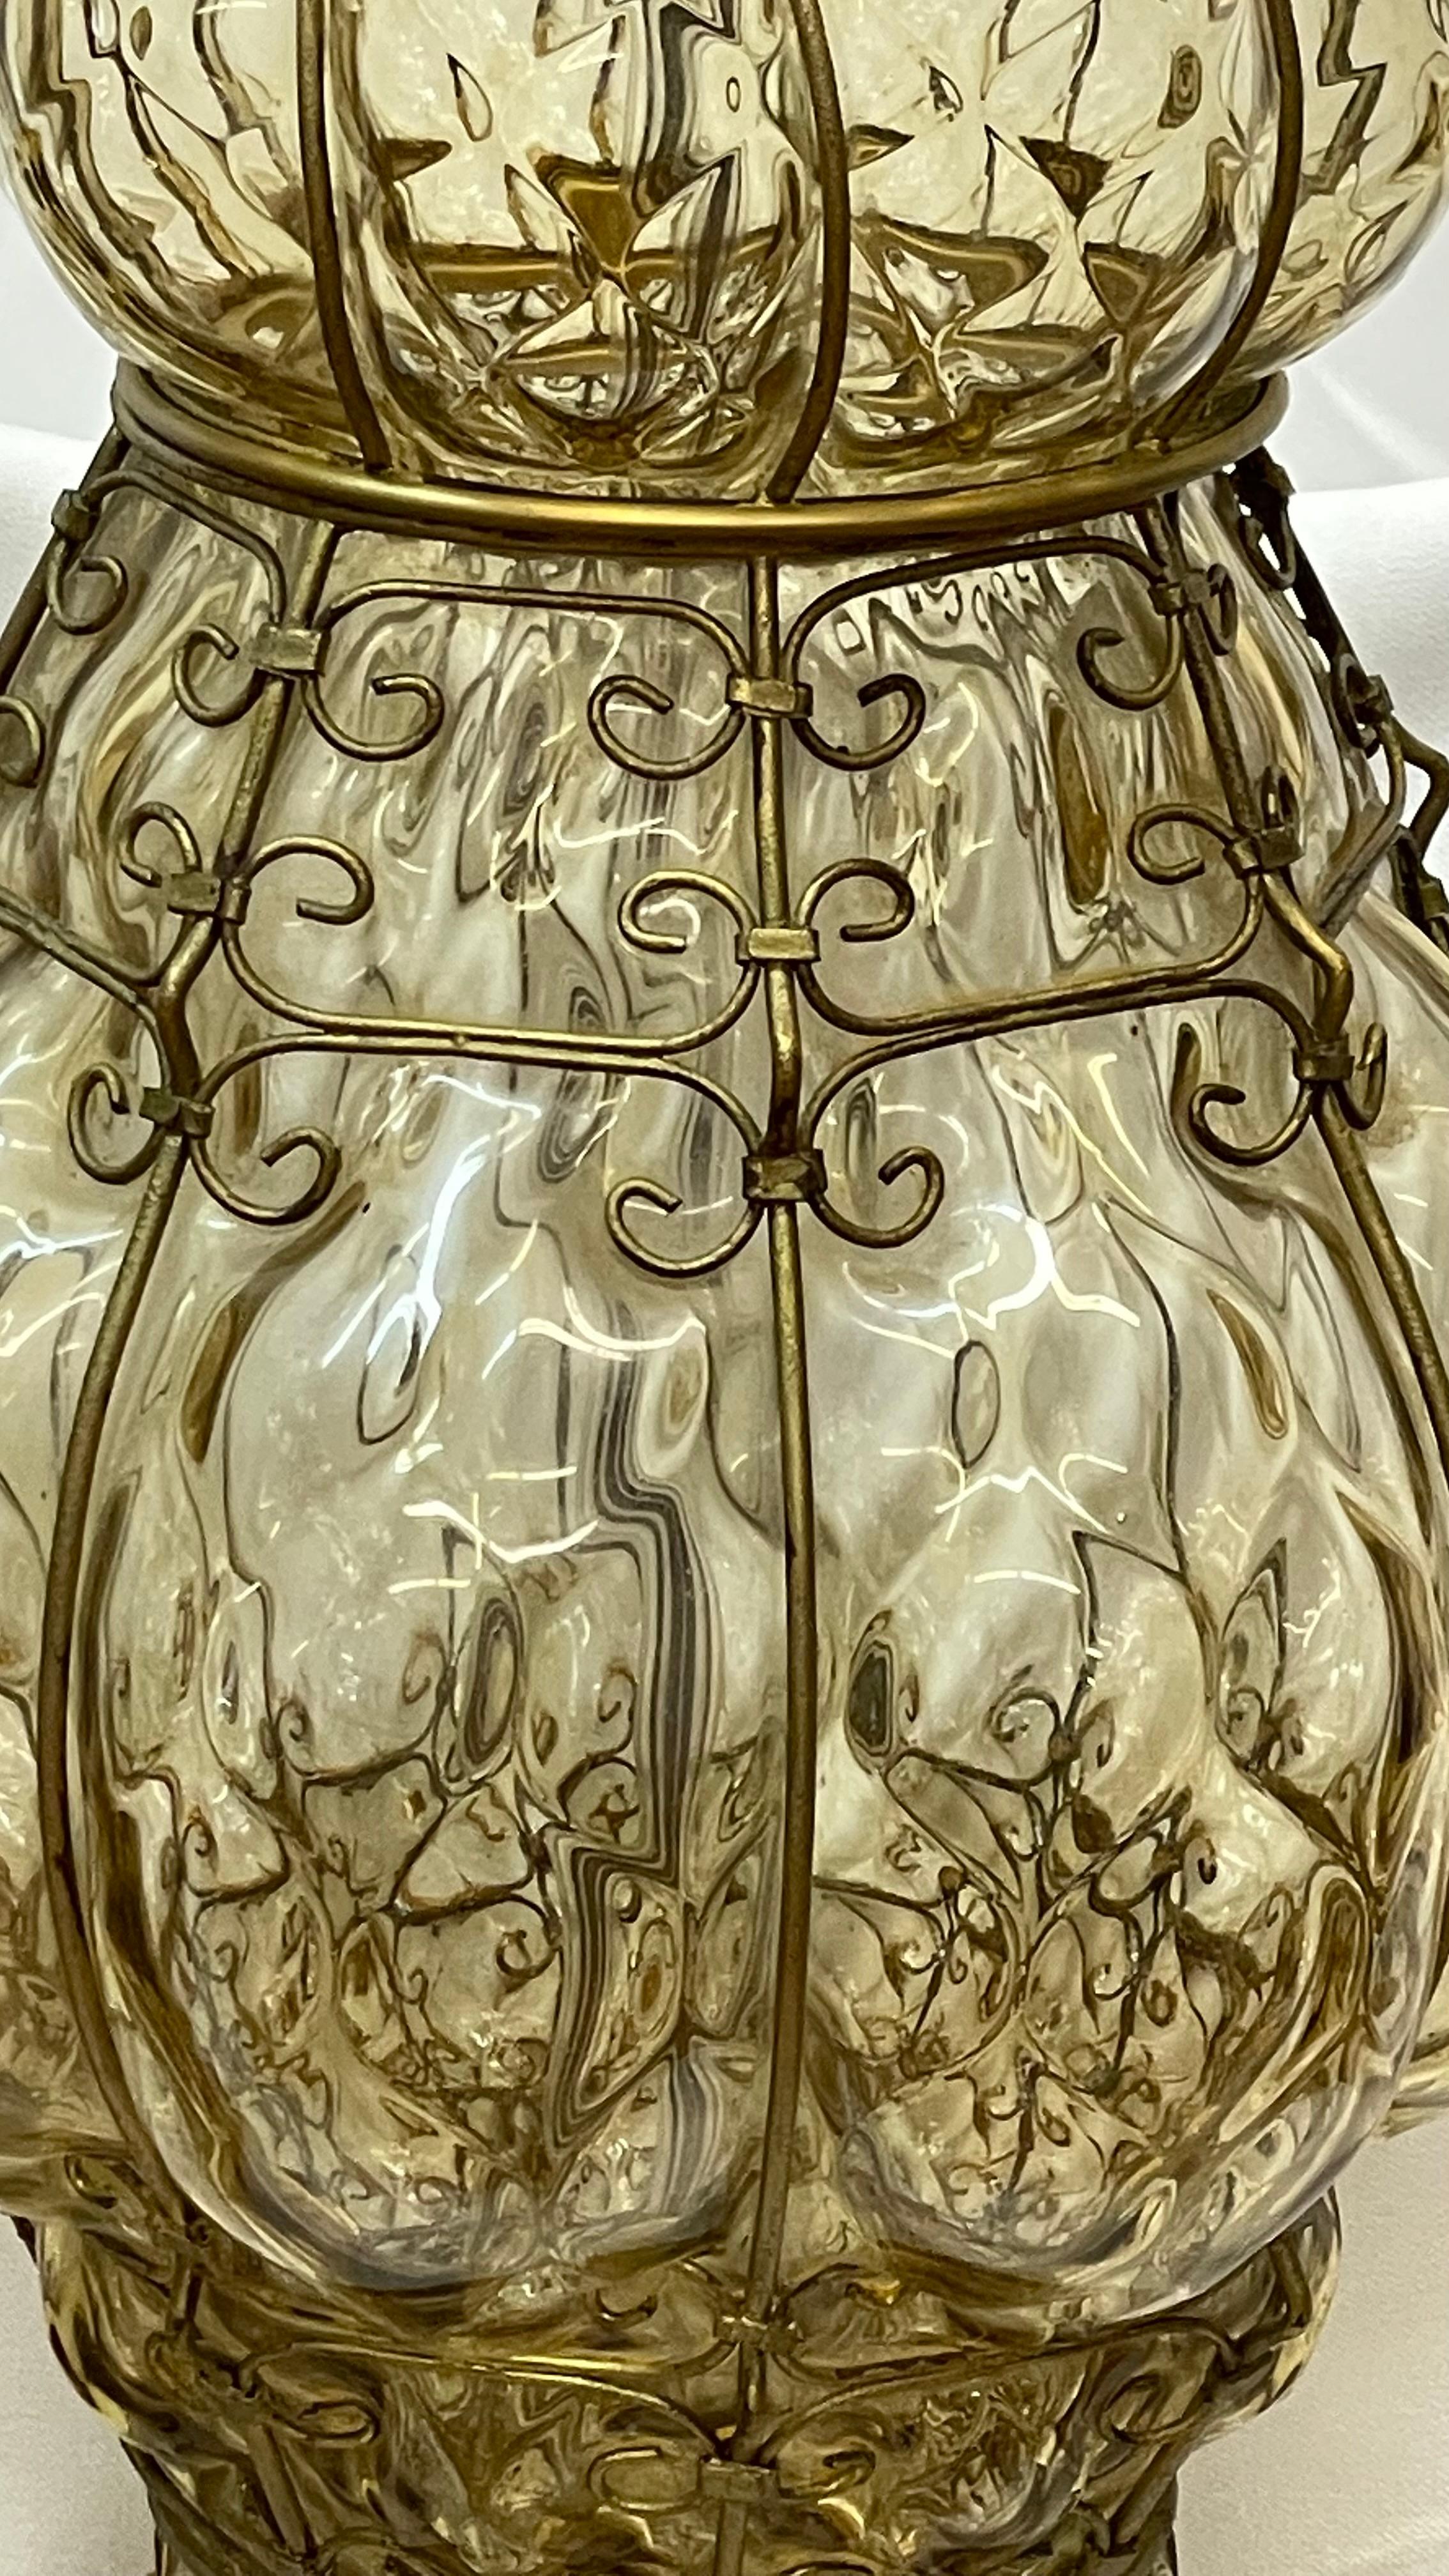 Pair of Marbro Venetian Table Lamps With Handblown Bubble Glass and Wired Cage Inserts

10x10x30